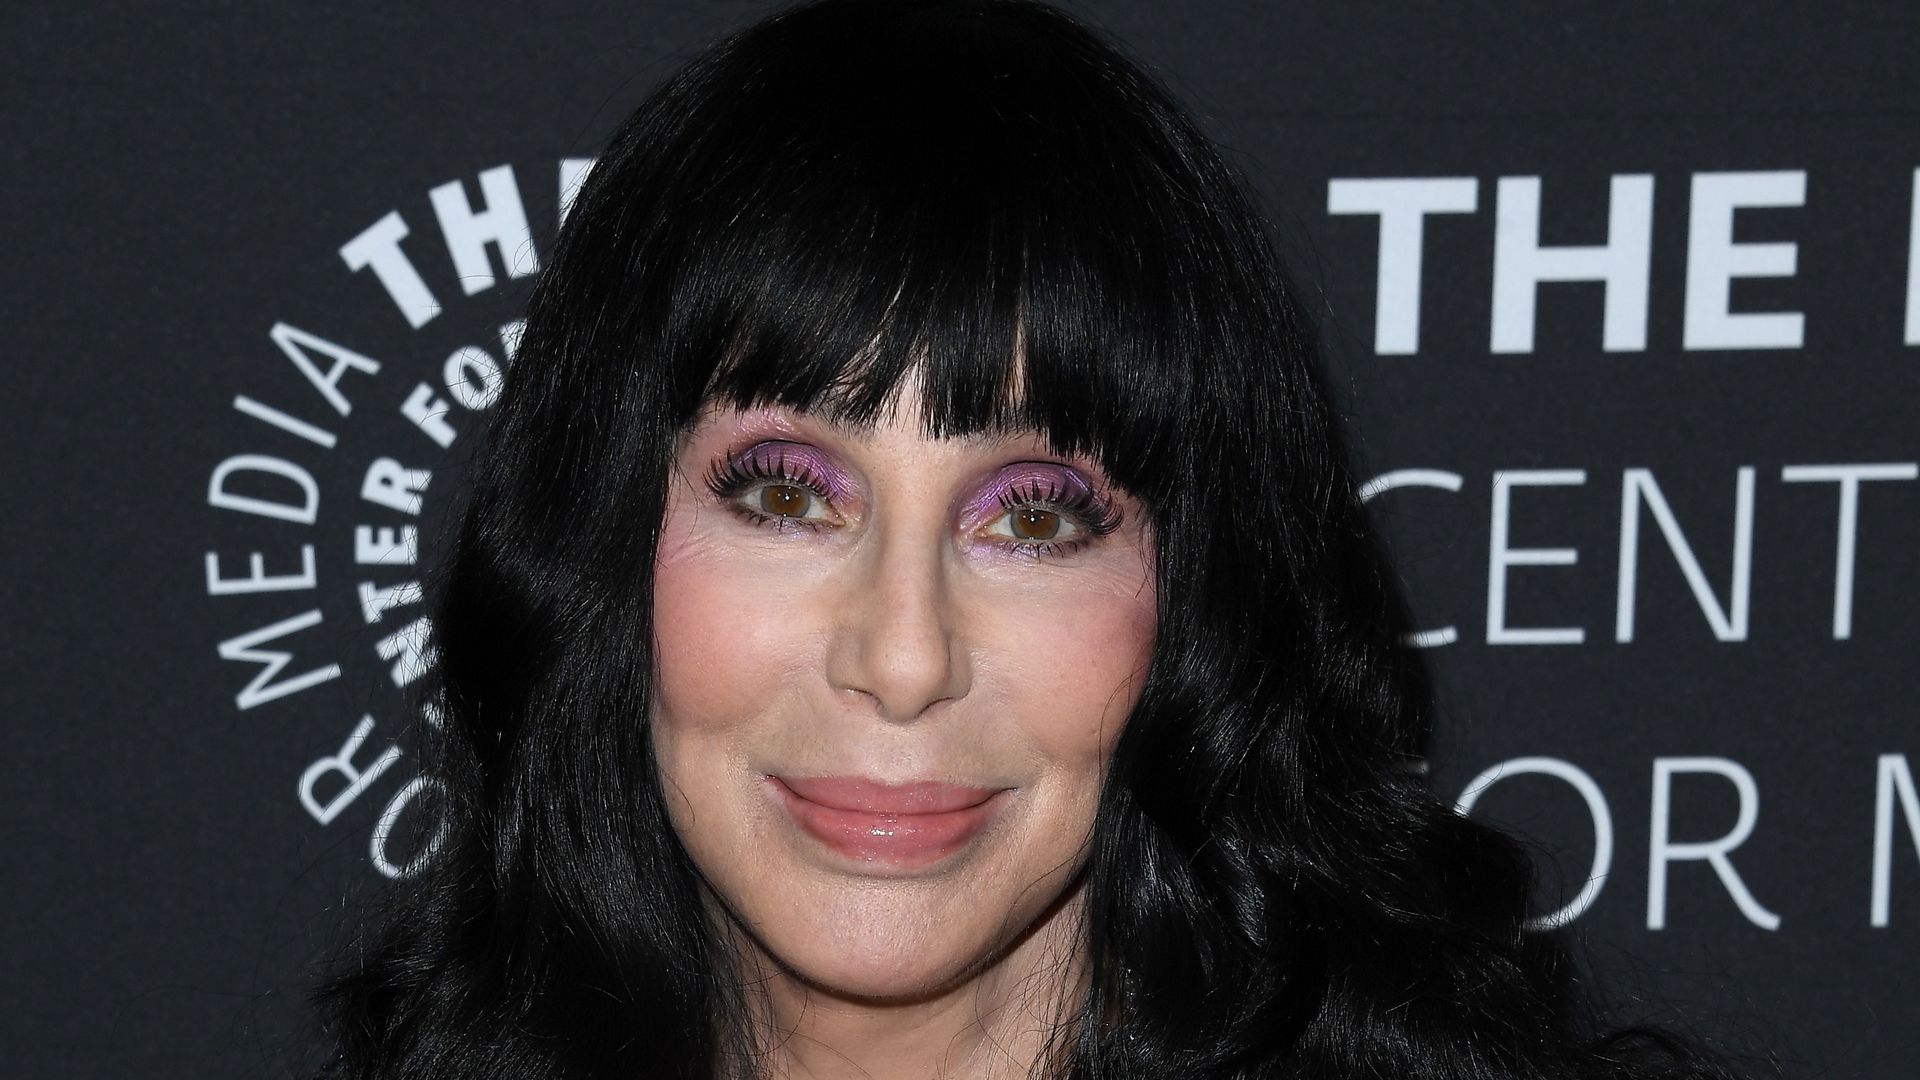 Cher dares to bare in revealing cut-out bodysuit for stunning new appearance